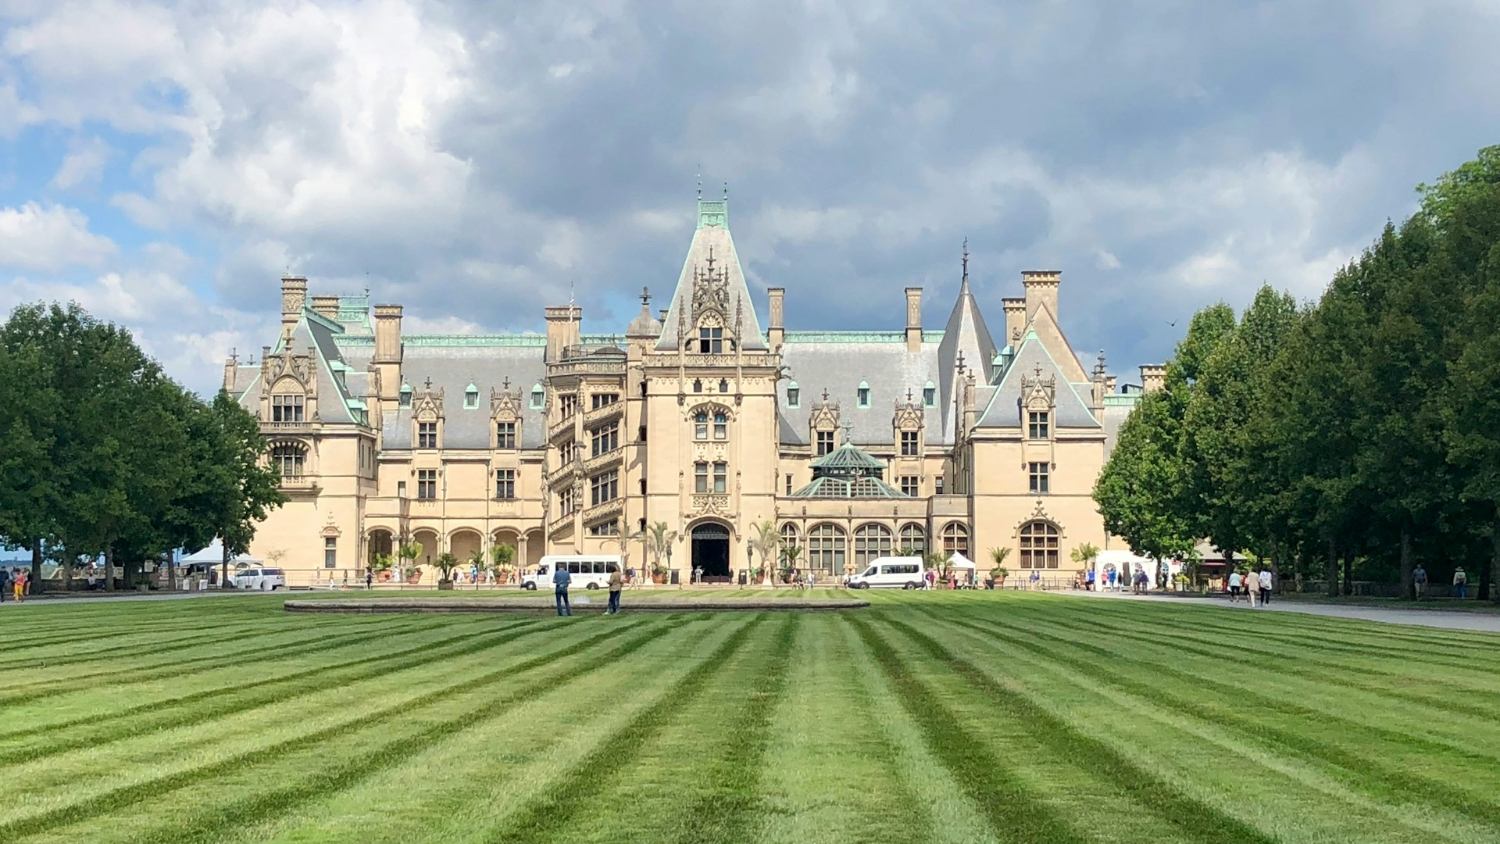 NC State employees can get a discount on admission to visit the Biltmore, an 8,000-acre National Historic Landmark in Asheville, on select dates .